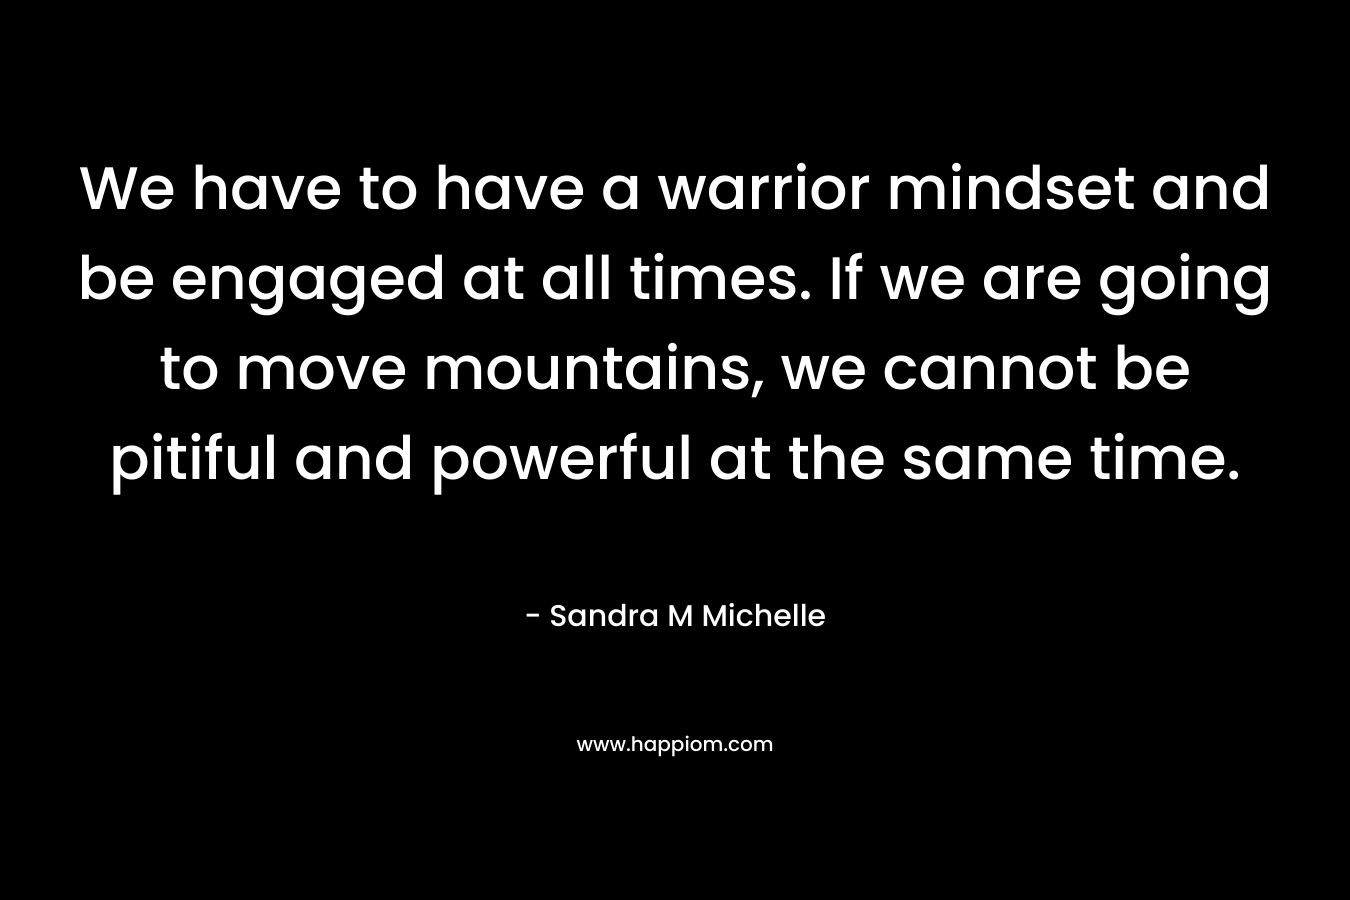 We have to have a warrior mindset and be engaged at all times. If we are going to move mountains, we cannot be pitiful and powerful at the same time.